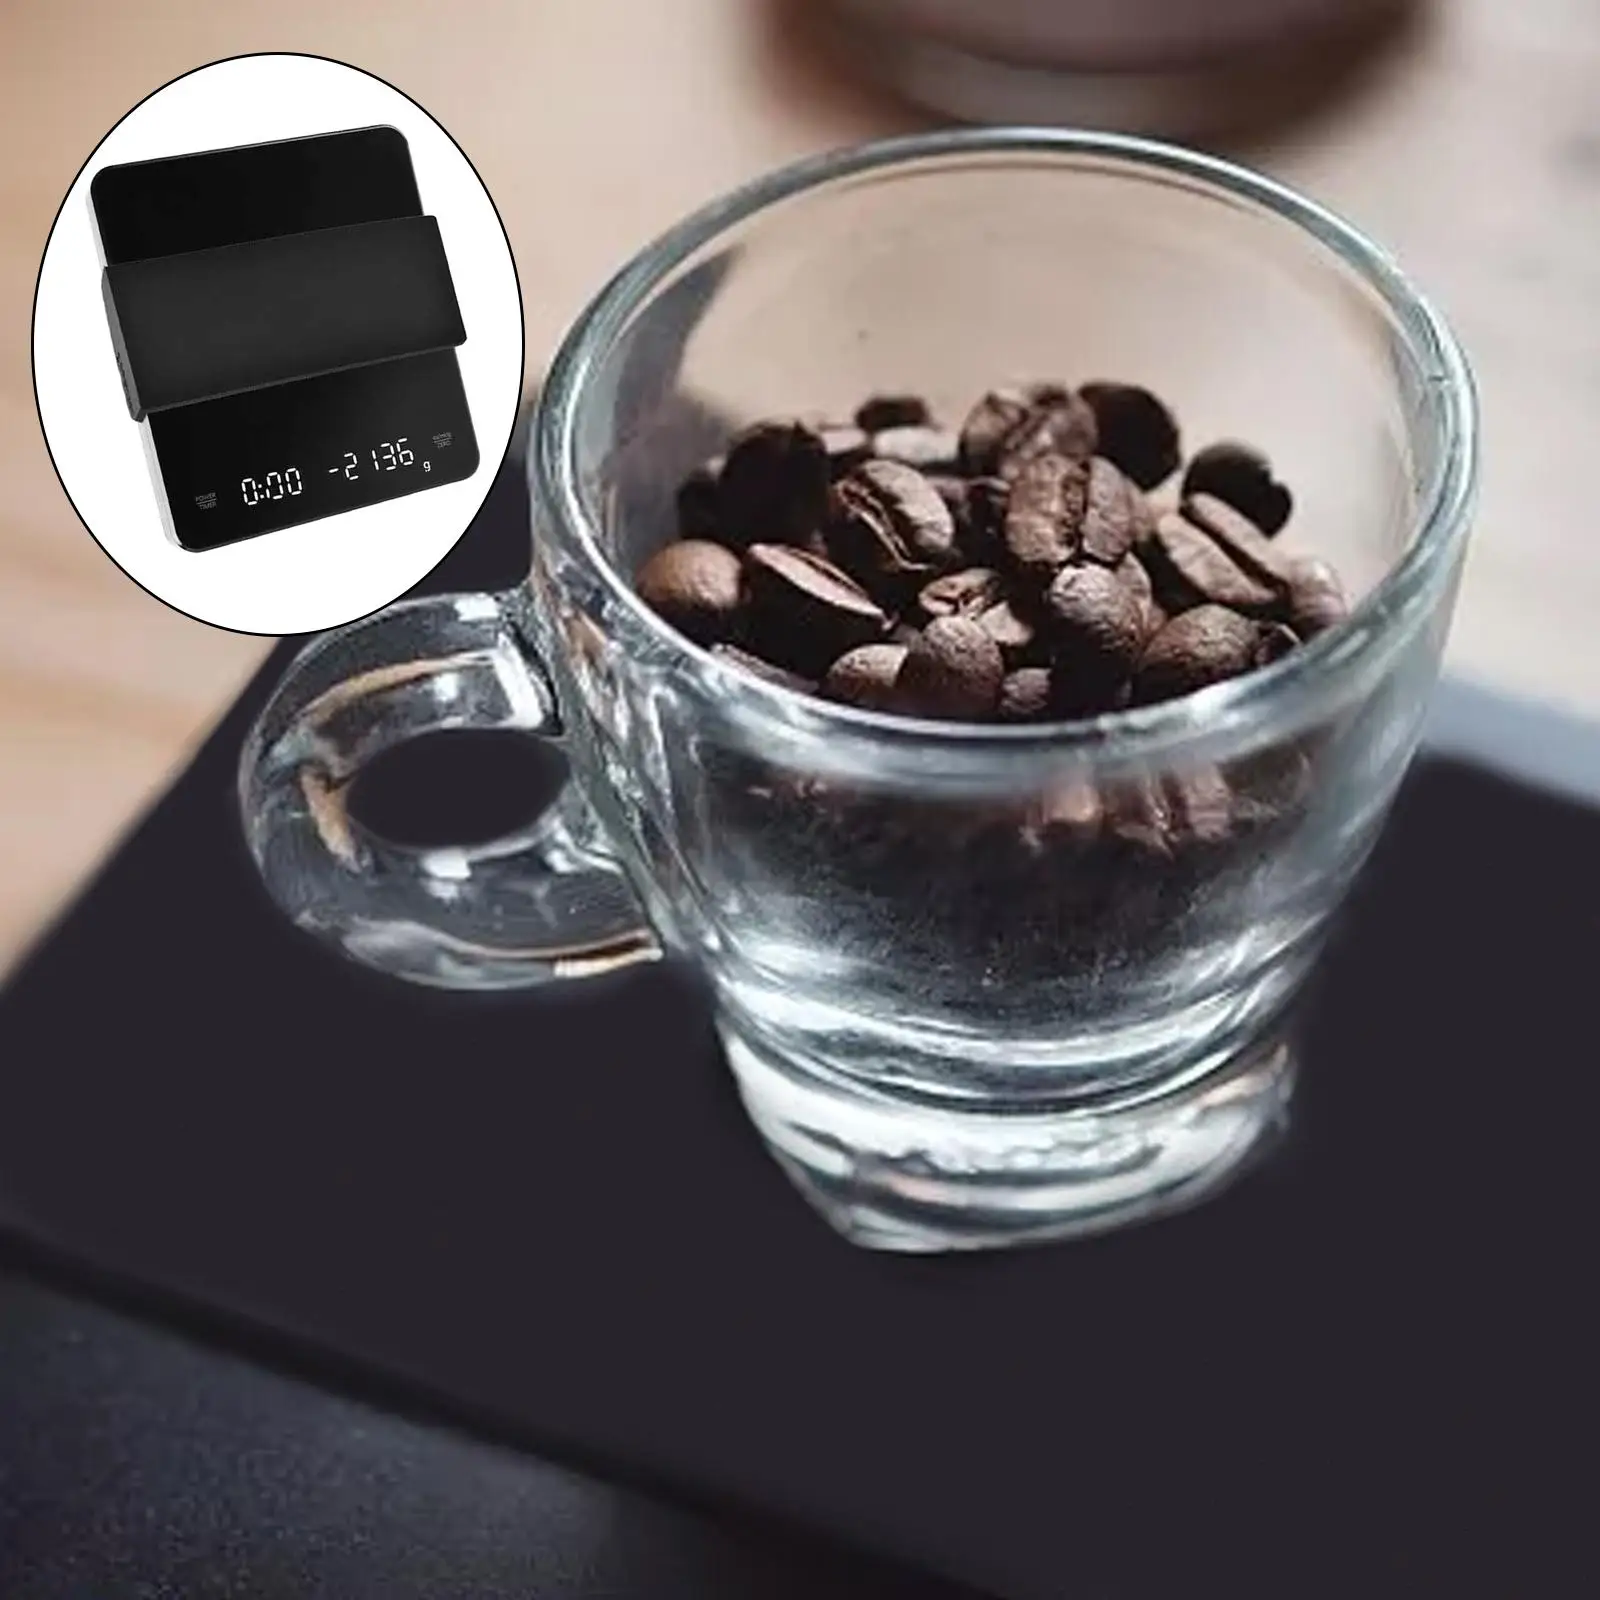 0.1G 3kg Digital Mini Scale, Modern Rechargeable High Precision Pour Over W/ Timer Digital Postal Scale for Kitchen Food Spices